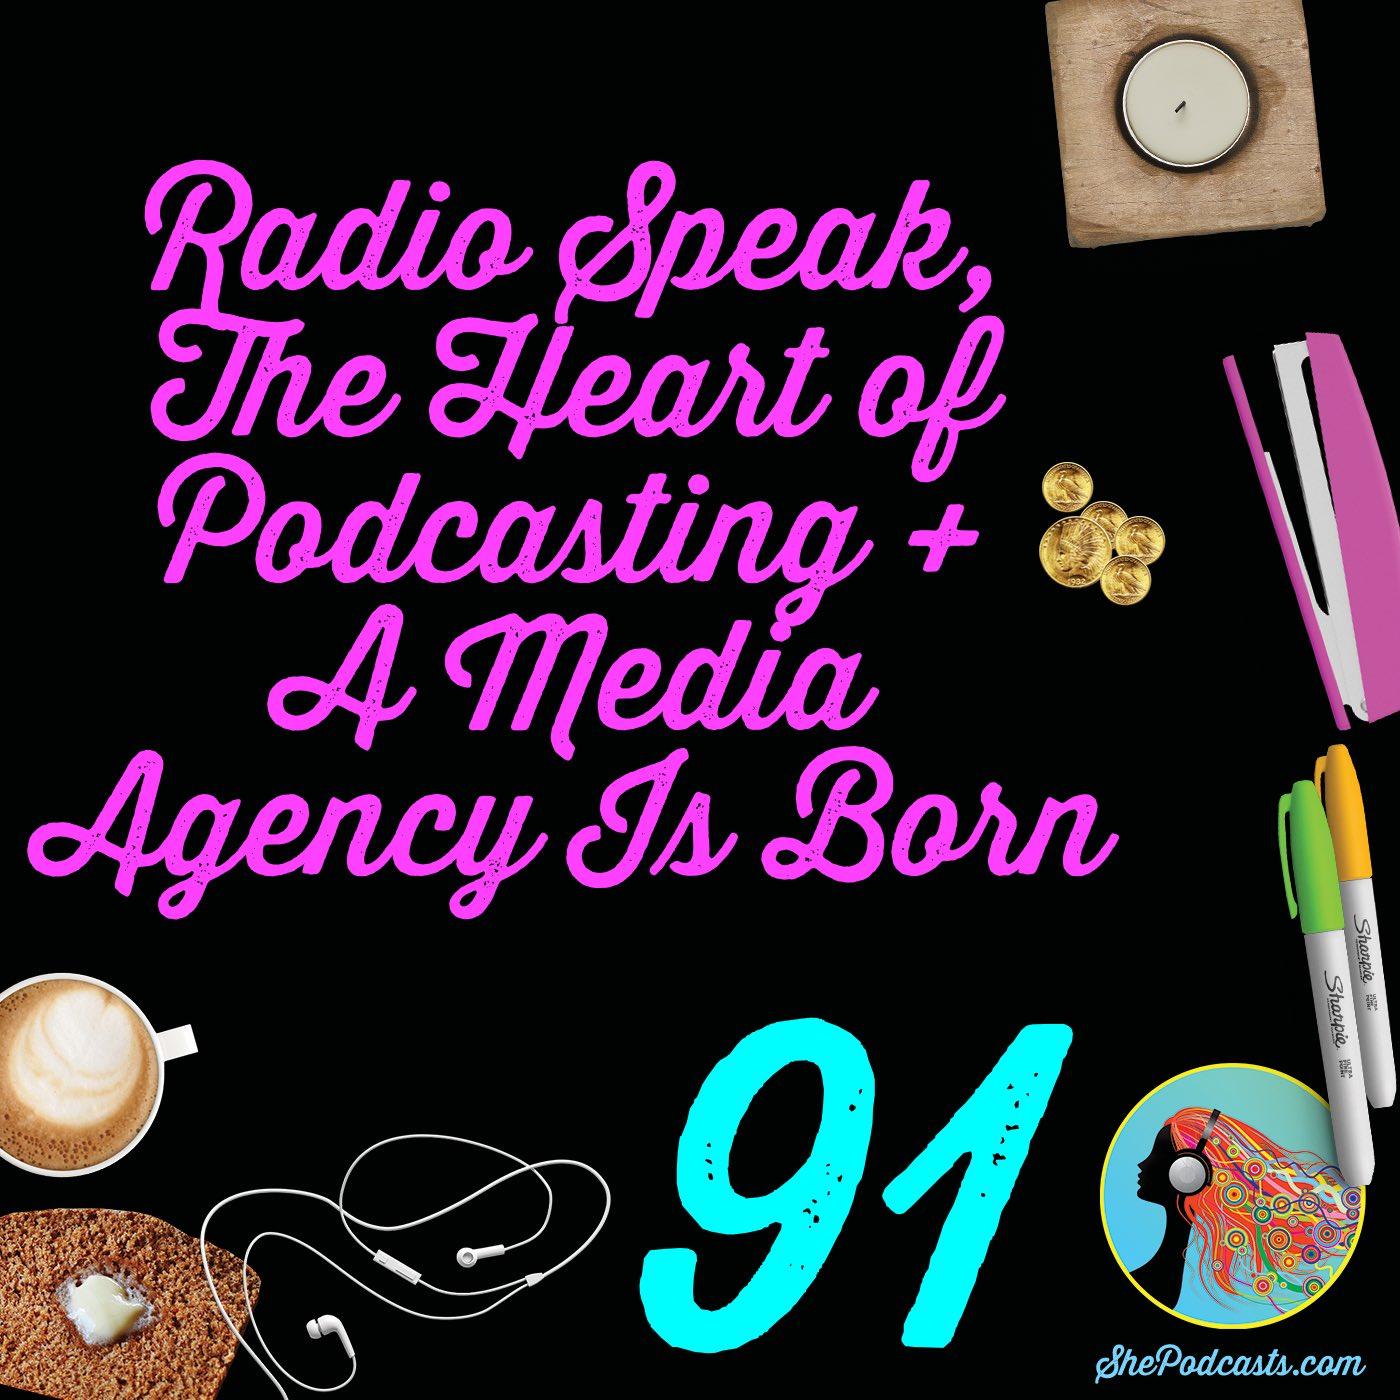 091 Radio Speak, The Heart of Podcasting And A Media Agency Is Born